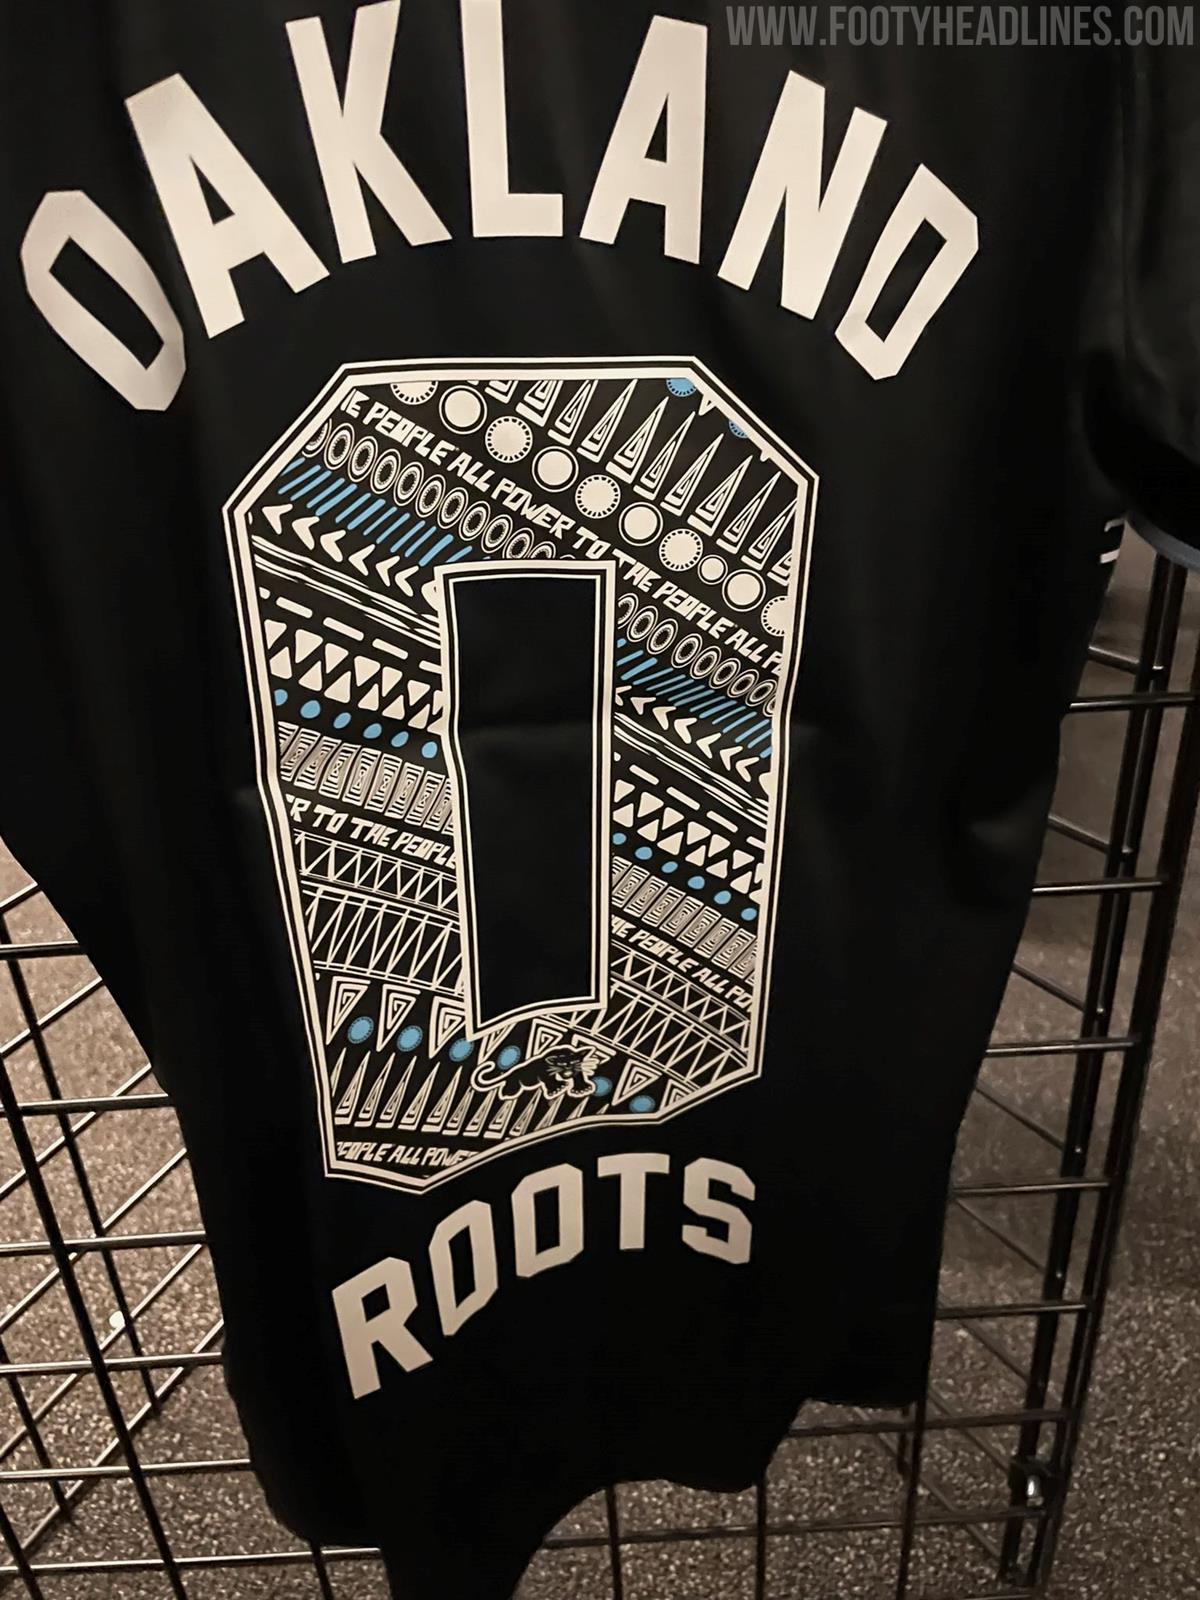 Shop Oakland Roots Black Panther Jersey